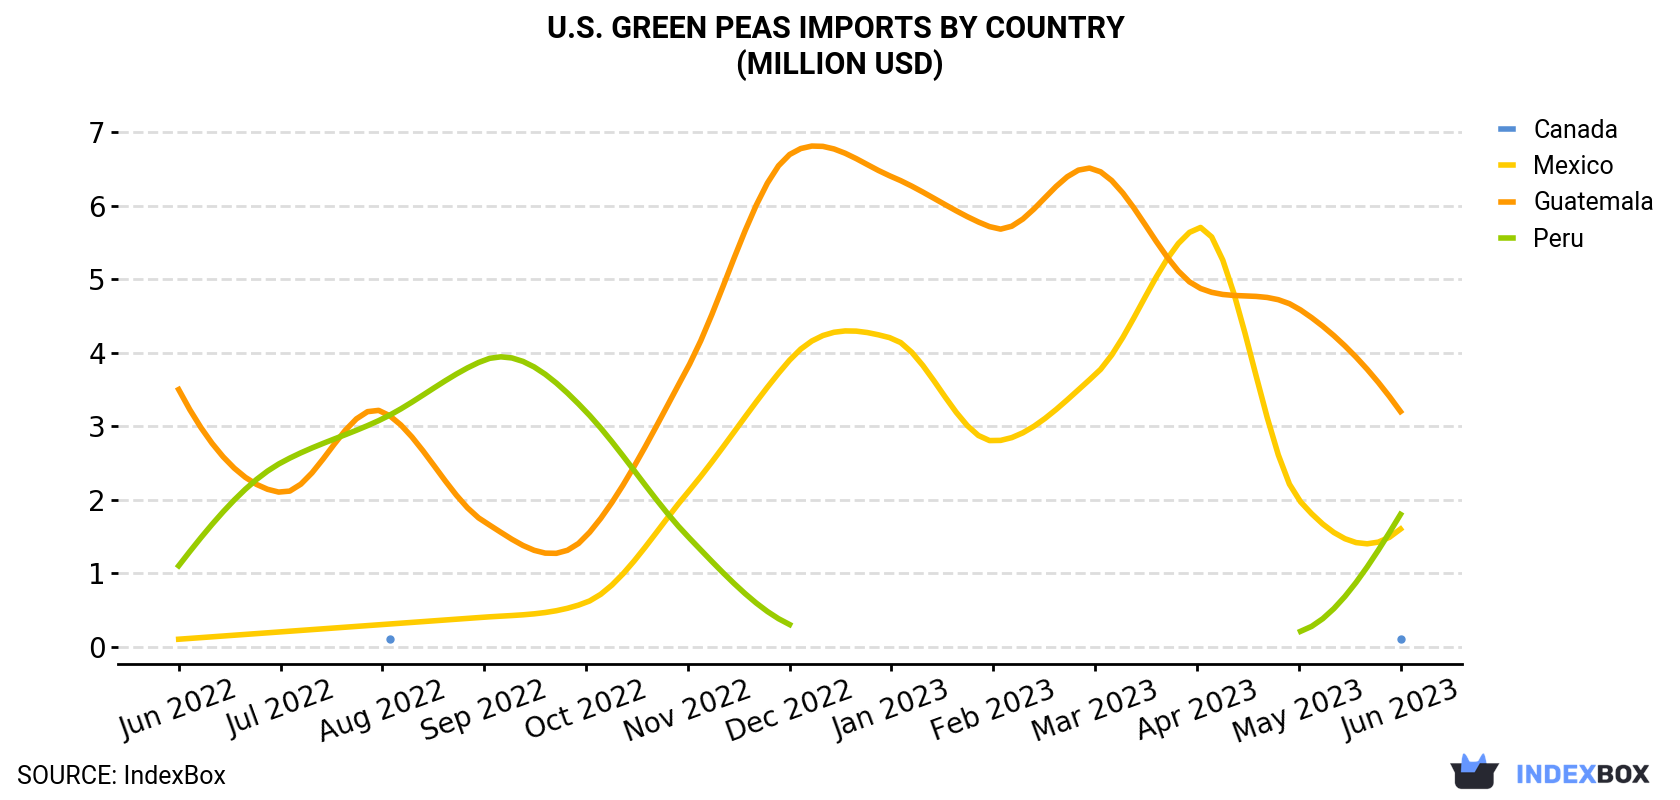 U.S. Green Peas Imports By Country (Million USD)